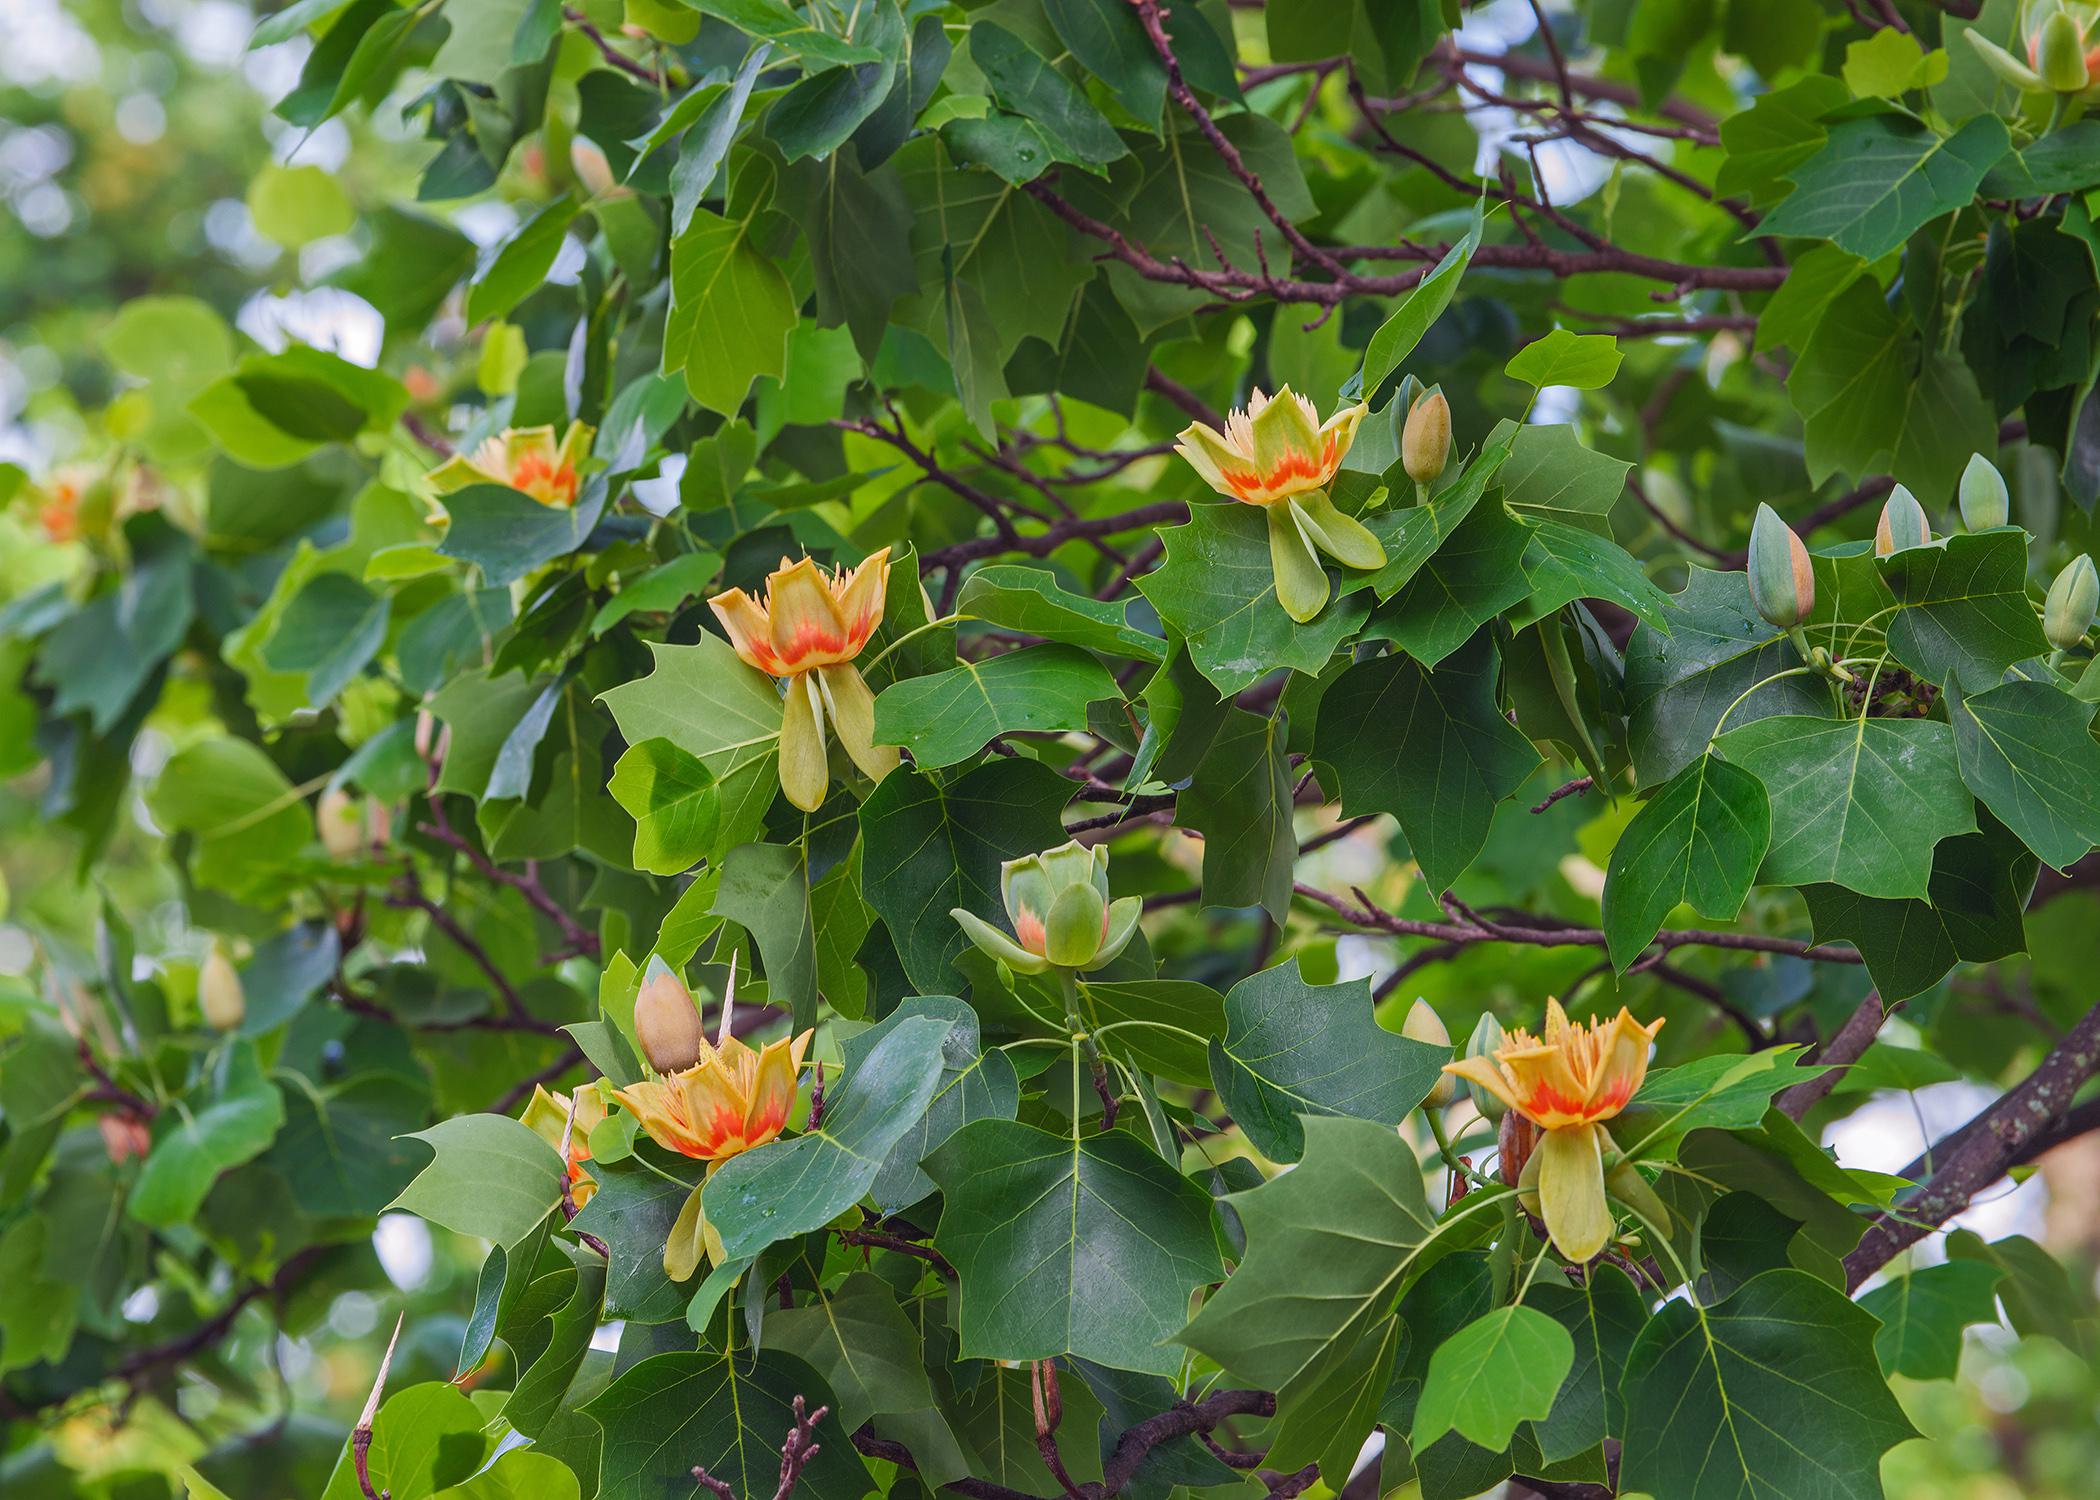 A closeup of a poplar tree showing its leaves and flowers